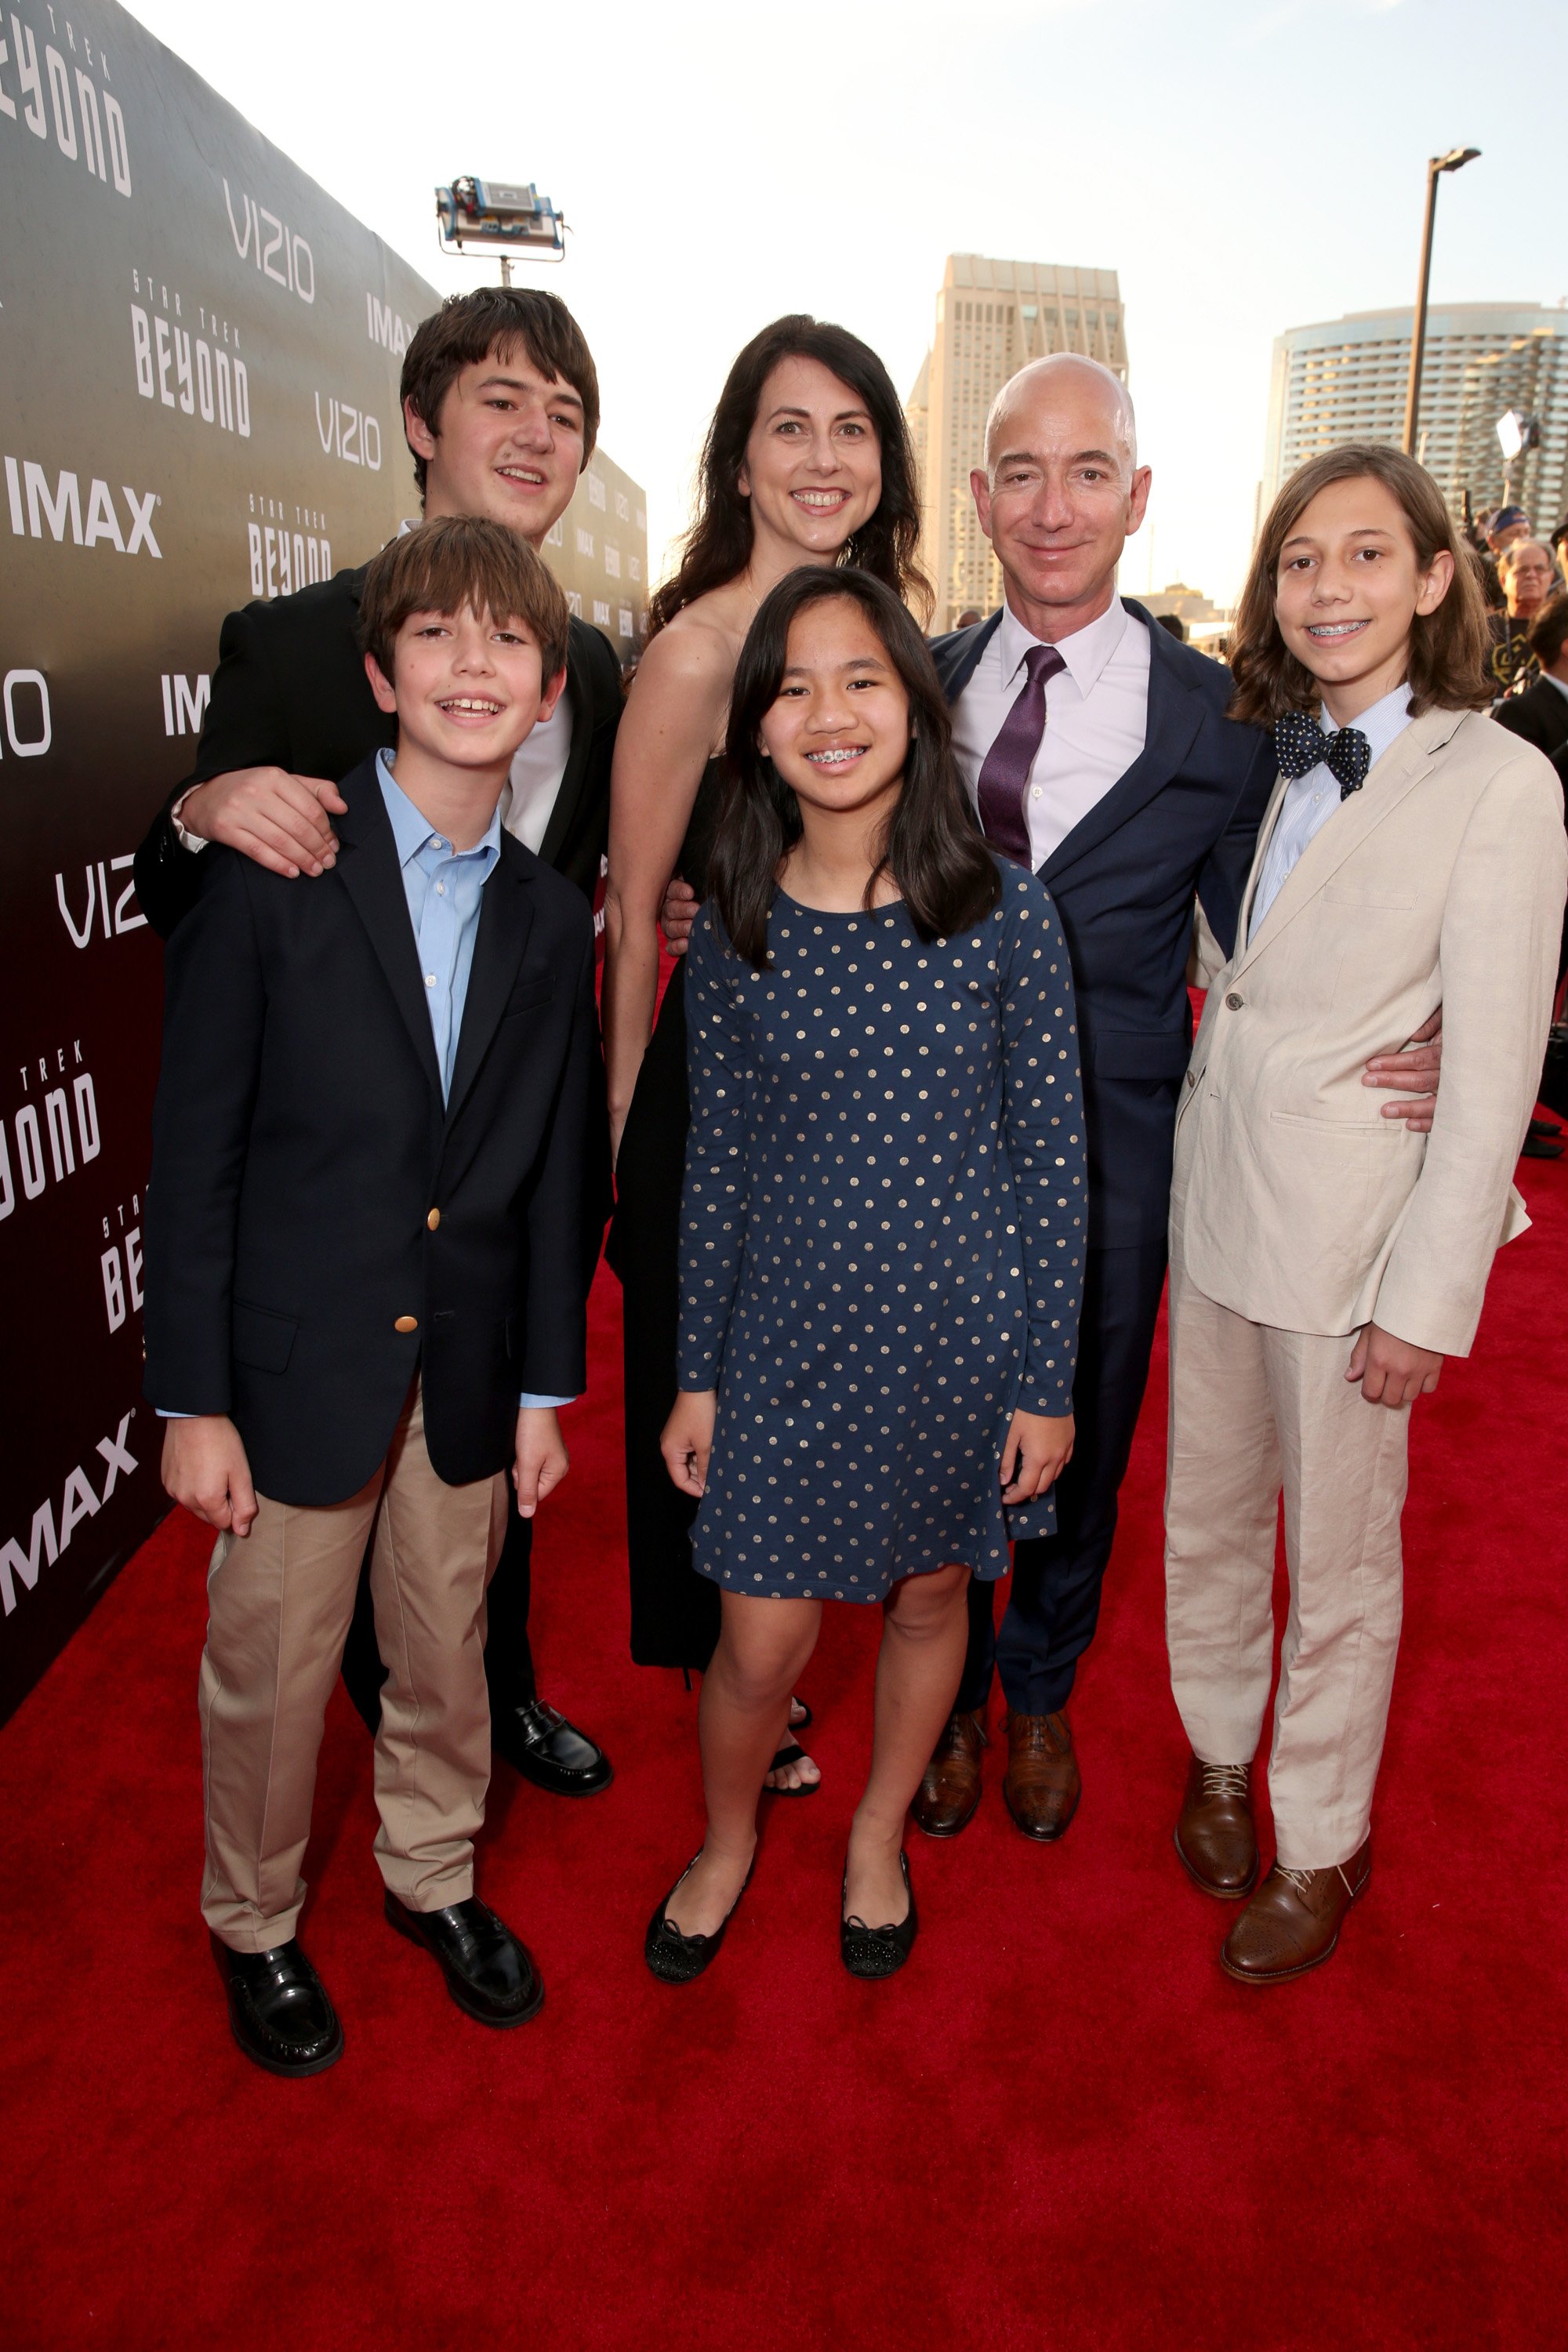 Jeff Bezos and his family at the premiere of "Star Trek Beyond" in California on July 20, 2016 | Source: Getty Images 